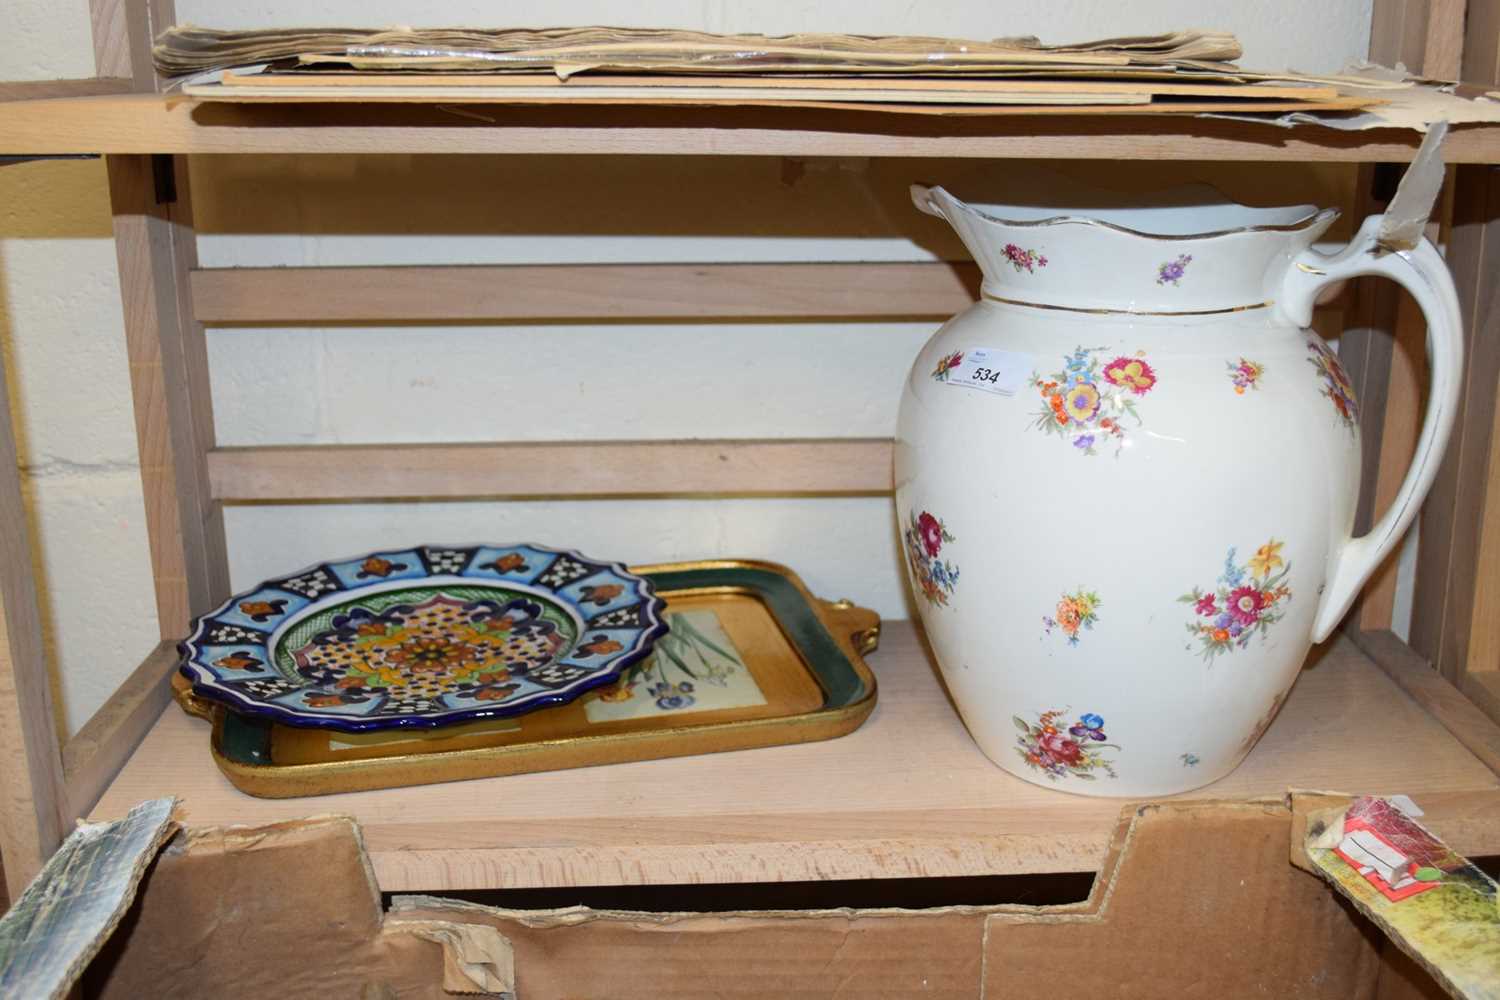 FLORAL WASH JUG, DECORATED PLATE AND TRAY